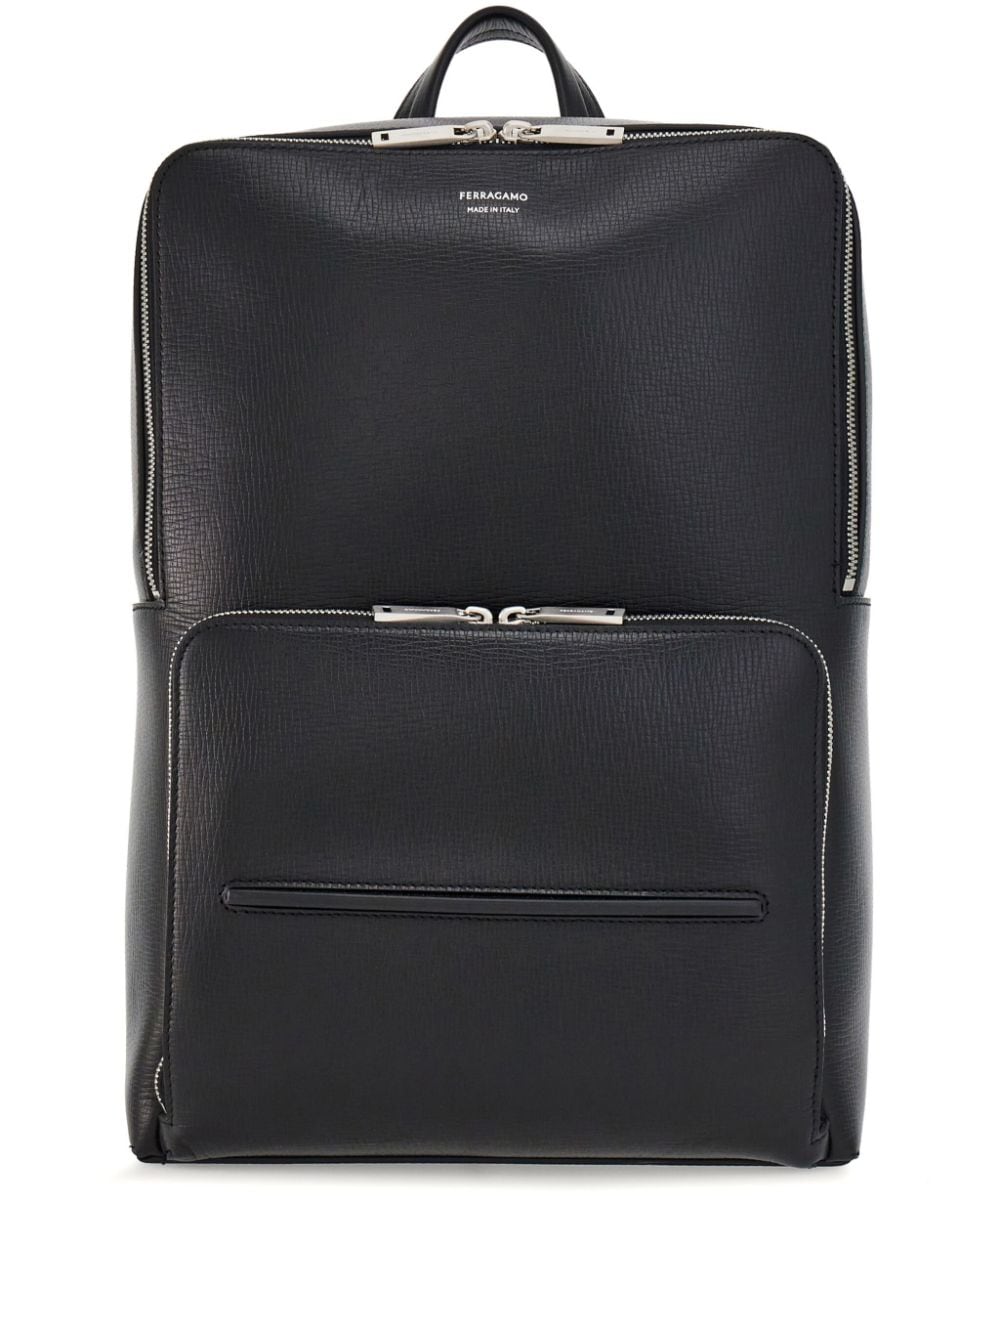 Ferragamo Grained Leather Backpack In Black